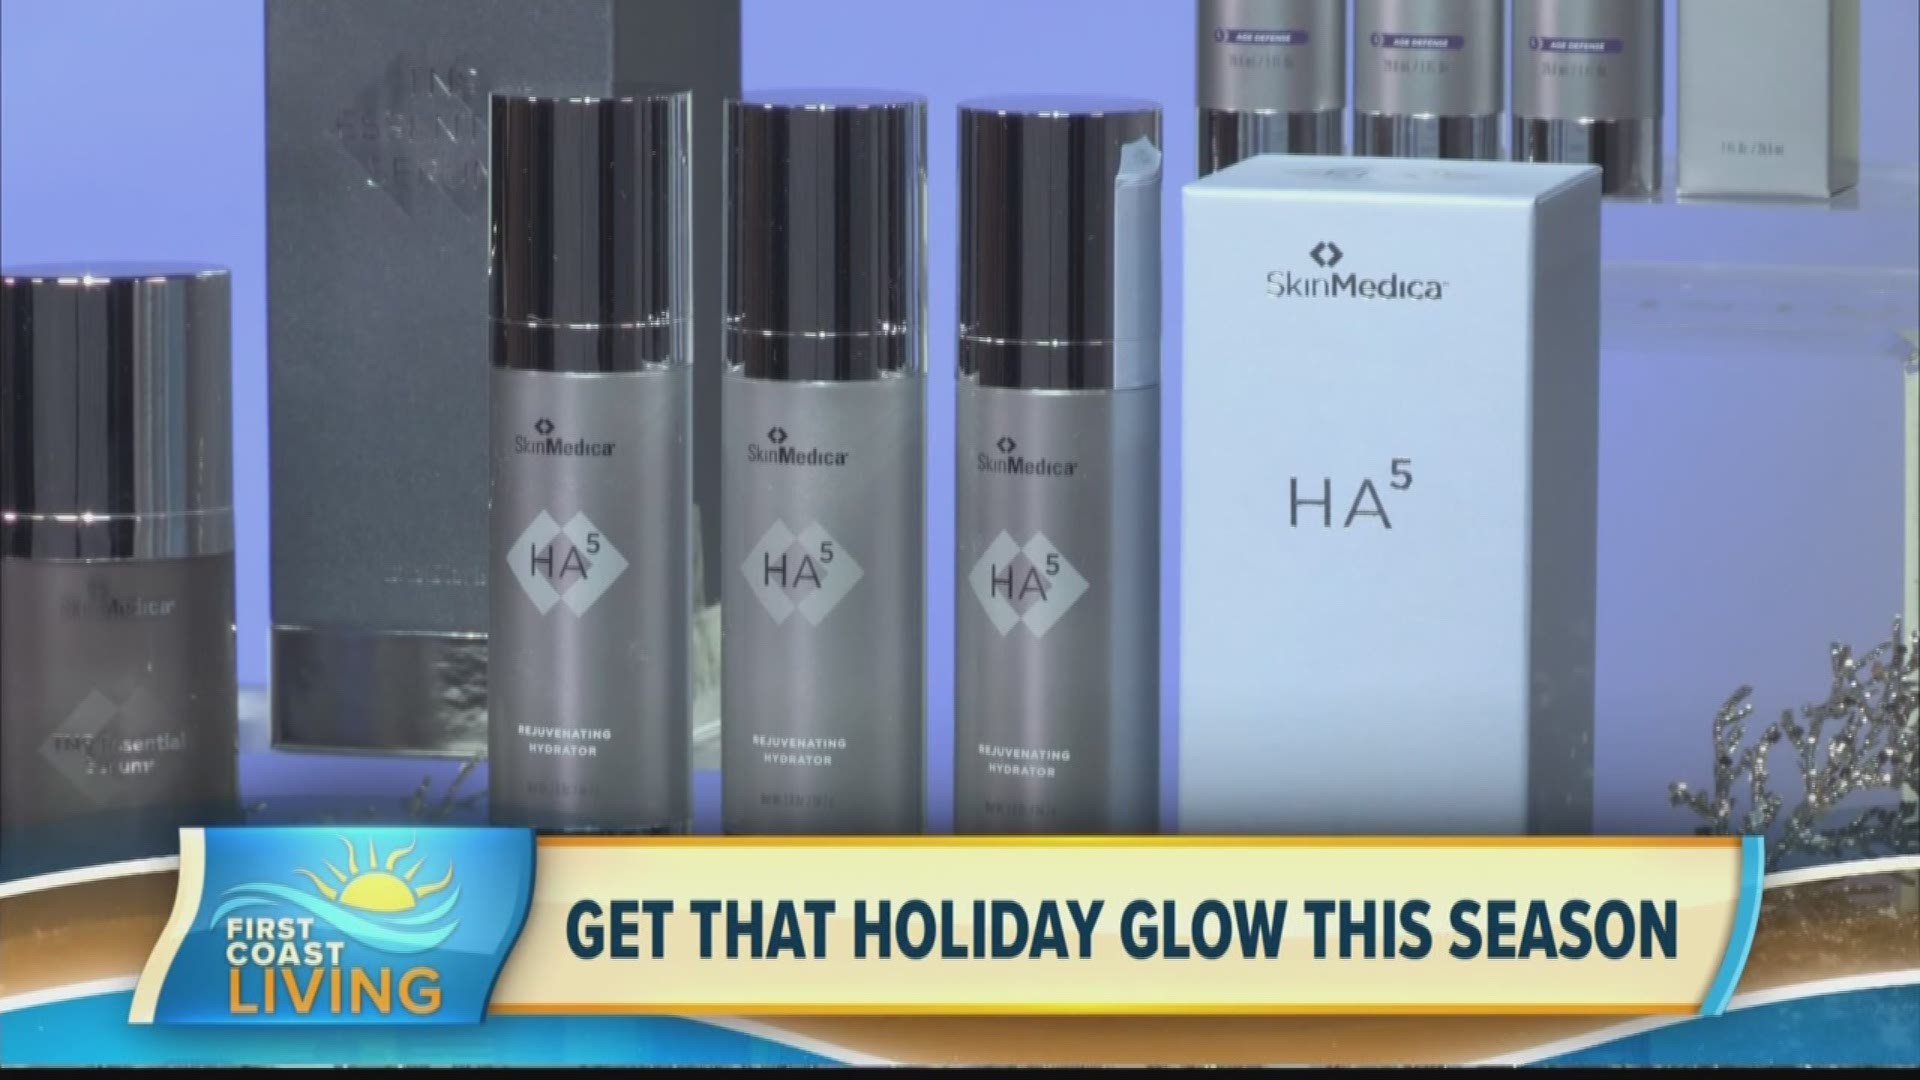 Here are some products that will guarantee a holiday glow!